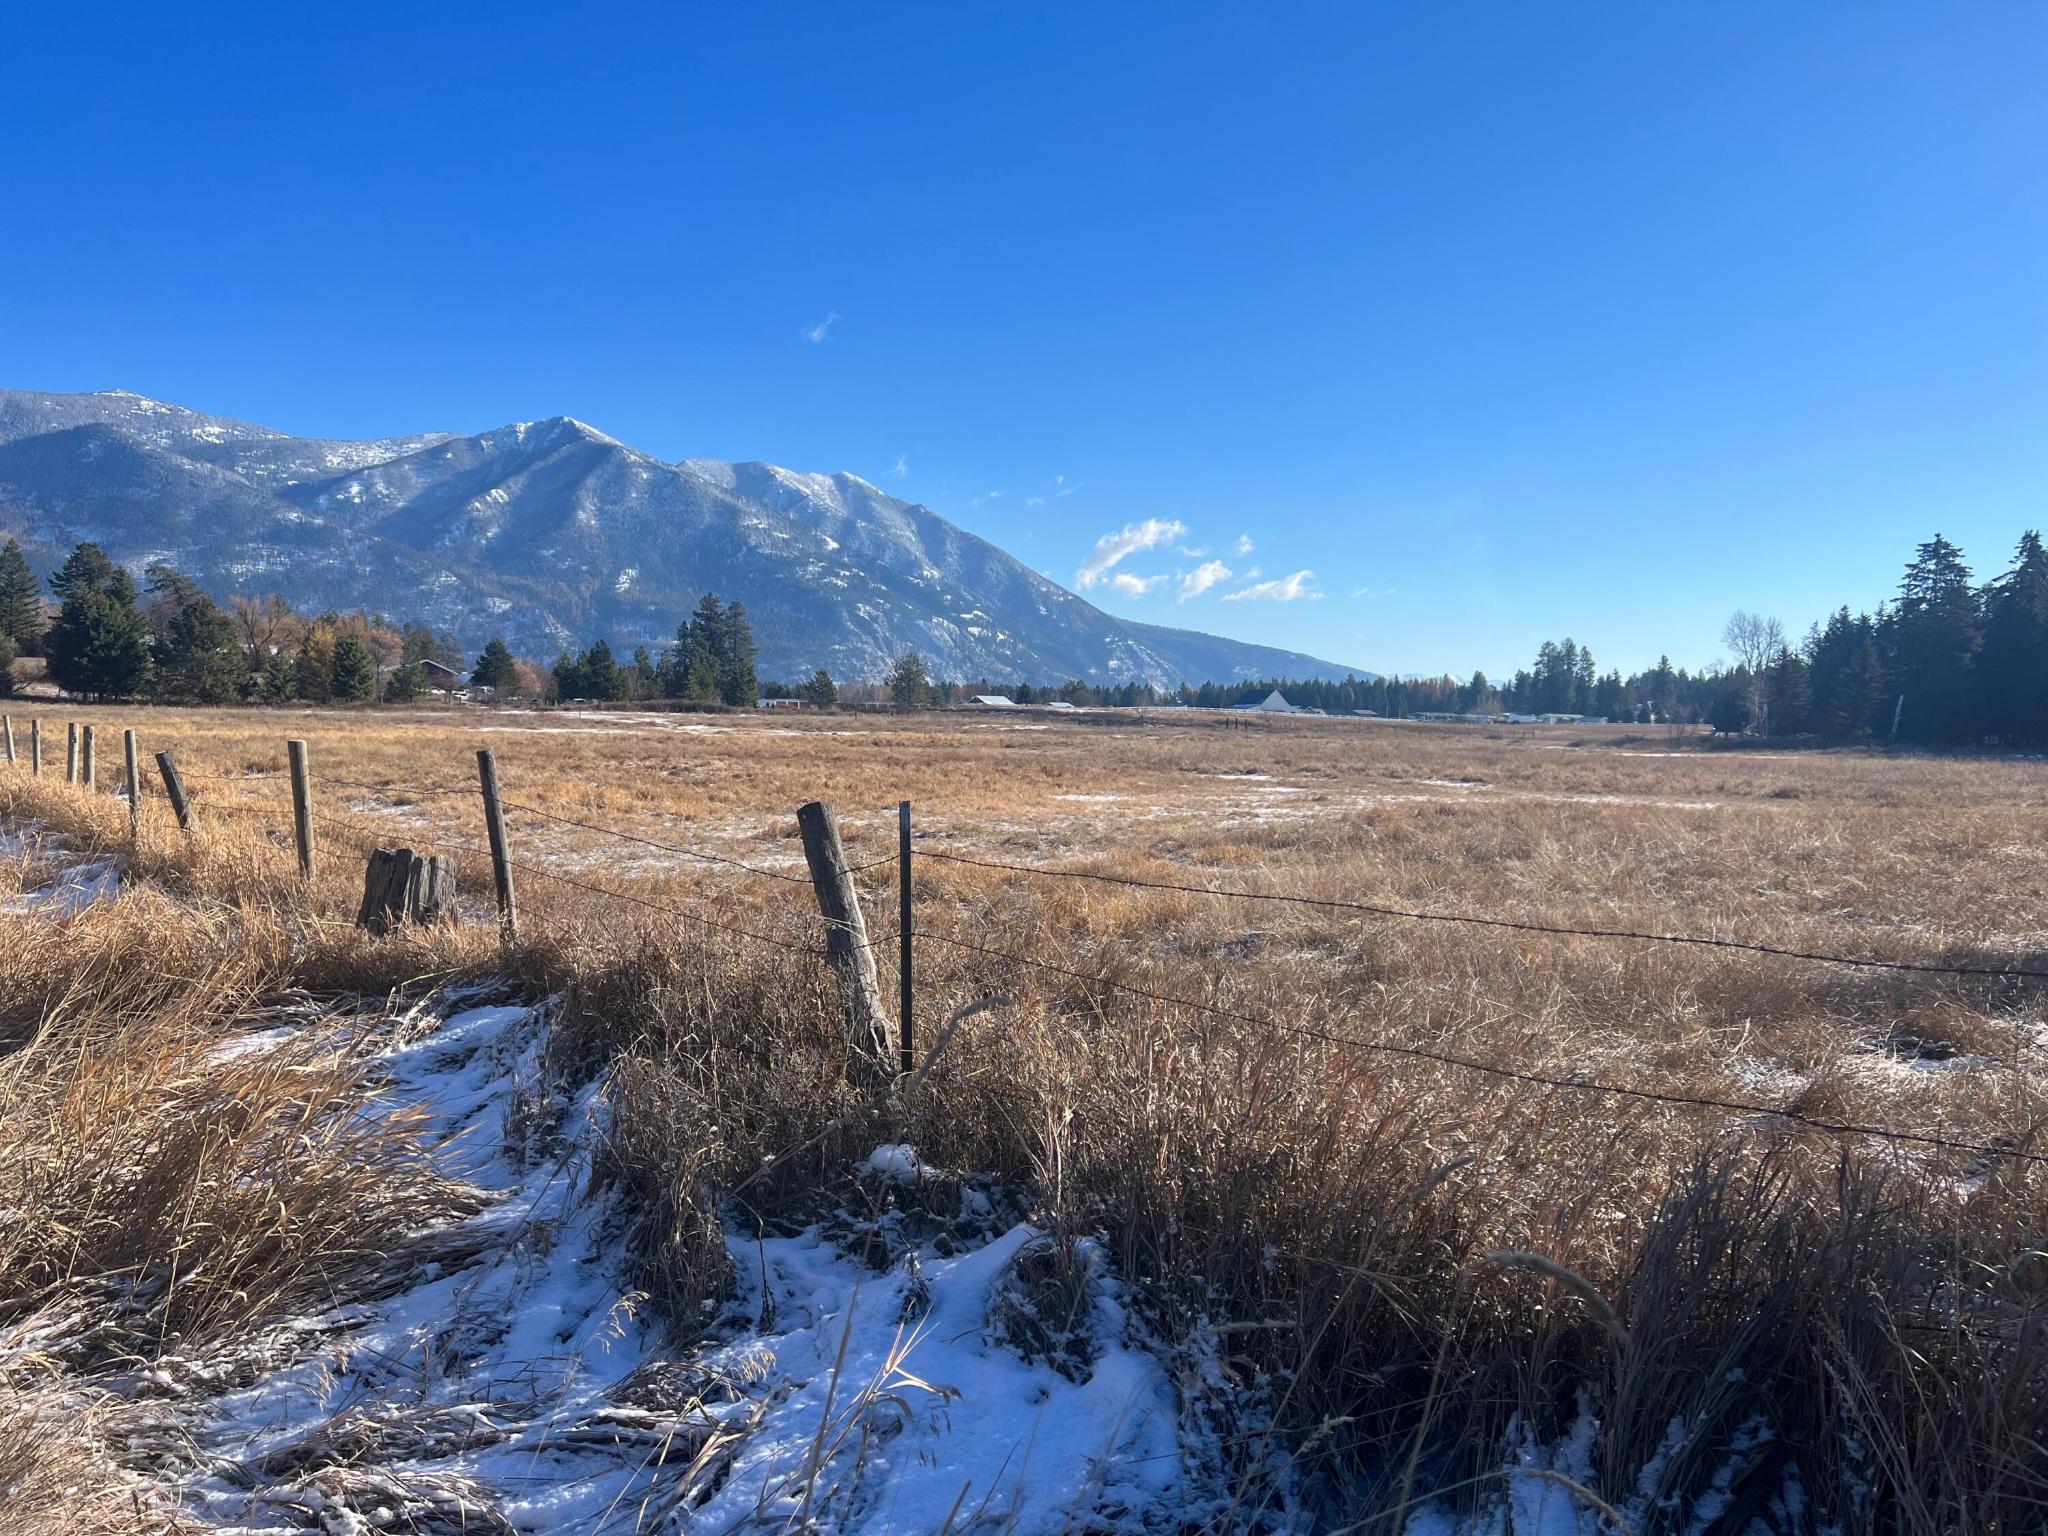 Remarks: This is a one-of-a-kind opportunity to build your dream home in the heart of Montana. This 10-acre parcel has Swan Mountain views and is located just minutes from Columbia Falls. The property is septic approved, with no covenants or zoning restrictions. And if that's not enough, the location can't be beat - this property is close to Glacier National Park. Don't miss out on this incredible opportunity!